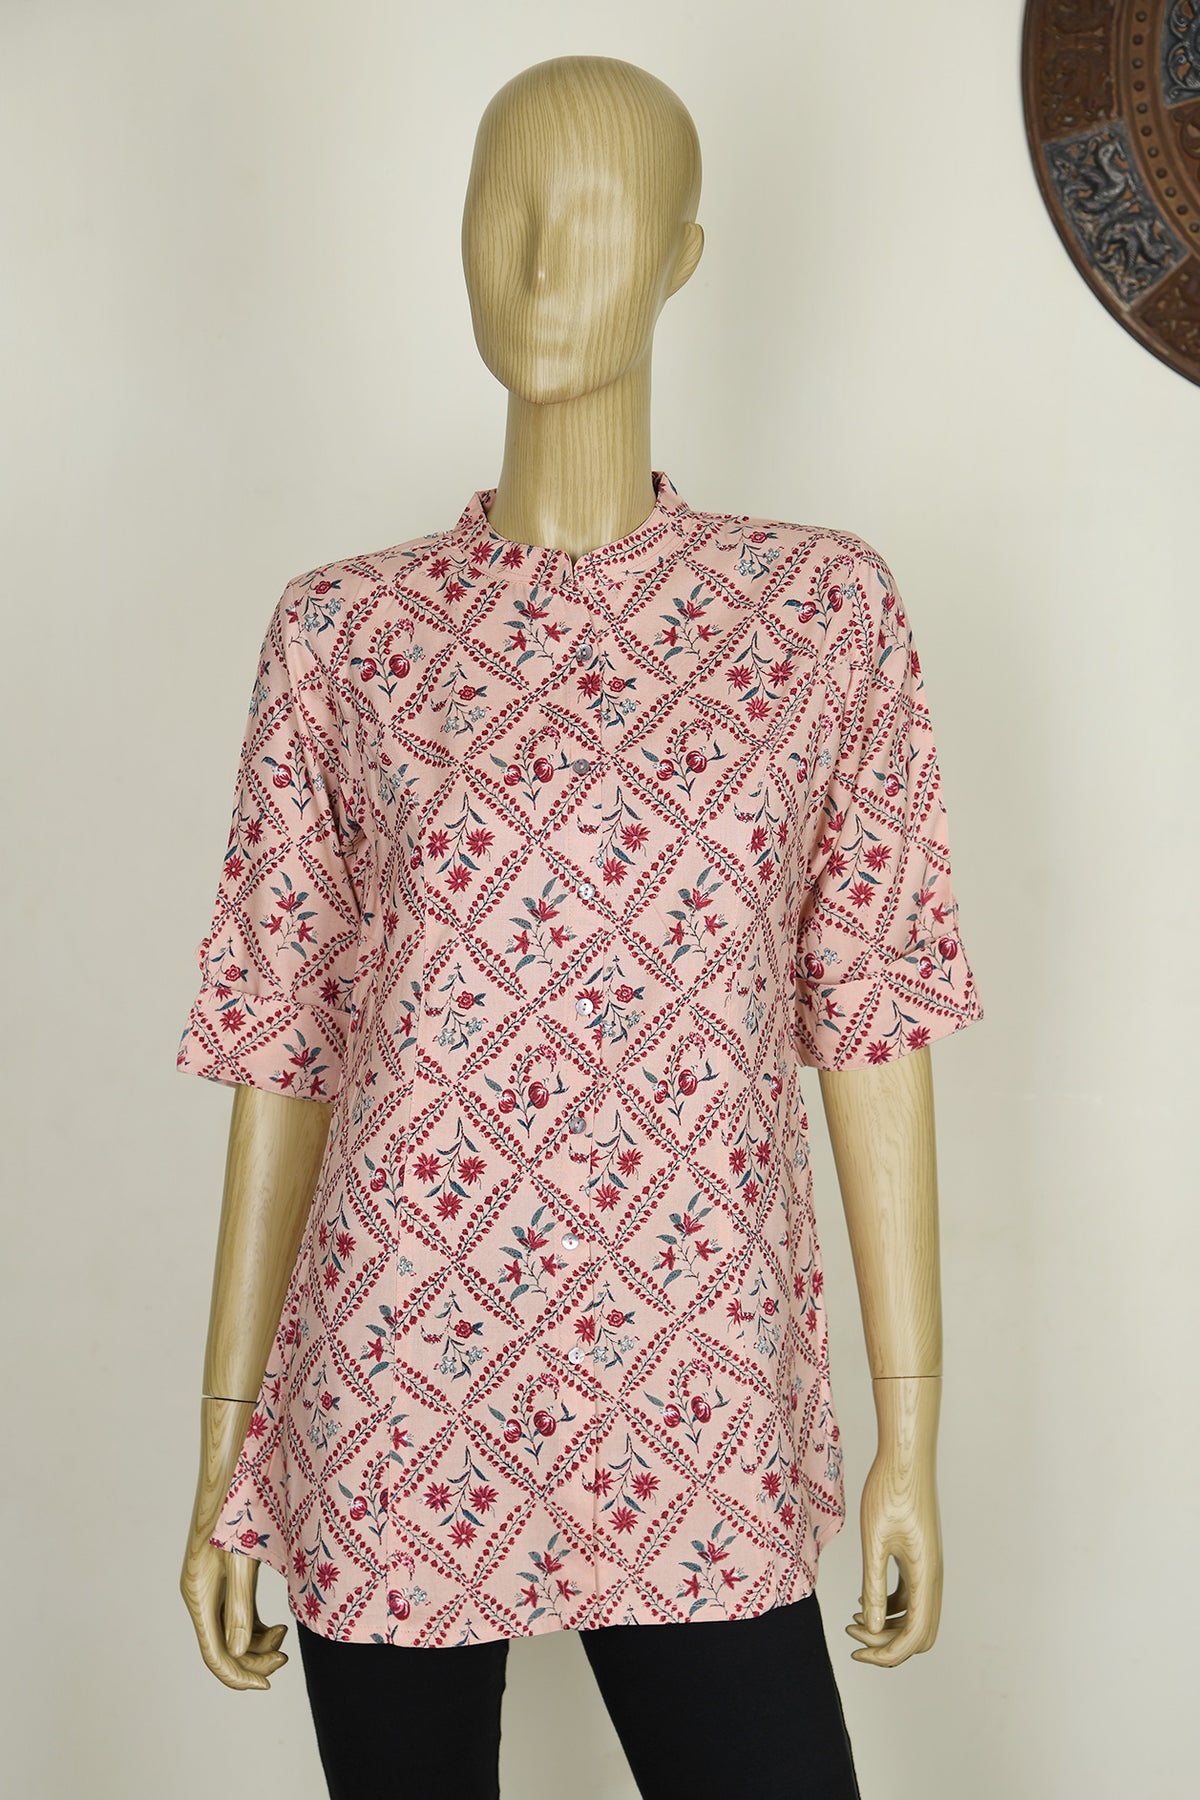 Chinese Collar Floral Design Peach Pink Printed Cotton Short Top